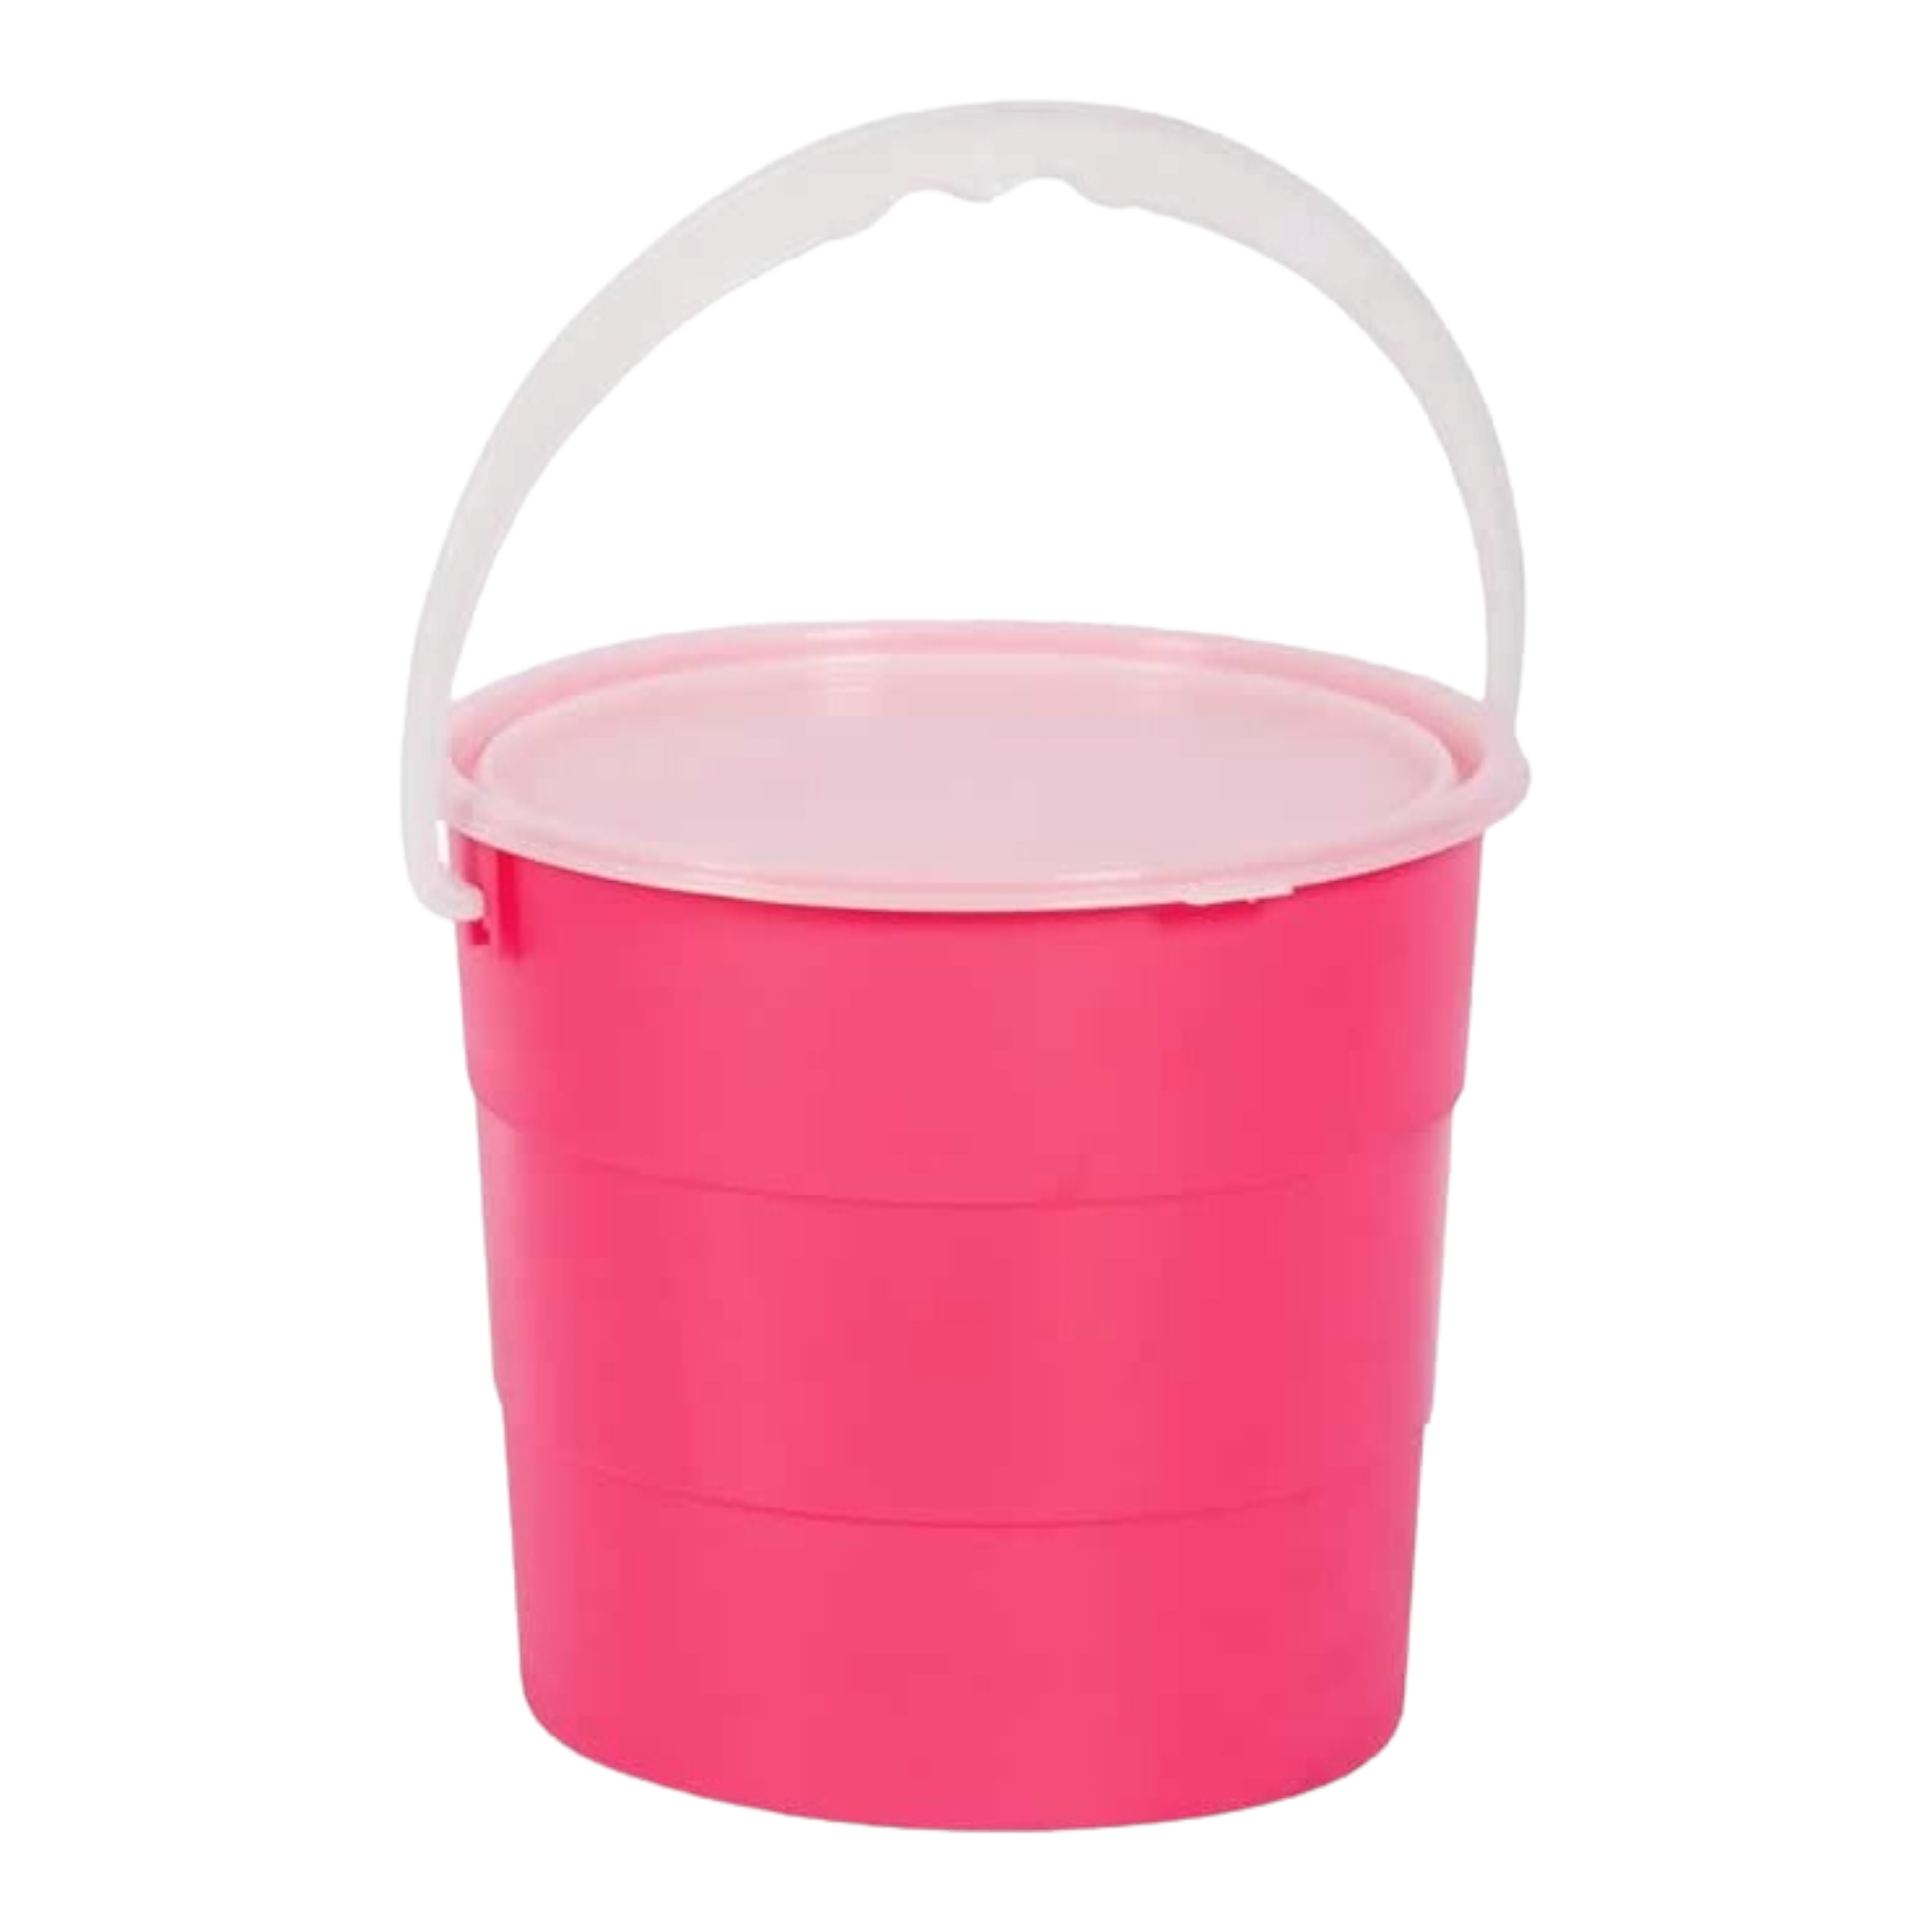 10L Plastic Bucket with Lid Assorted Color Buzz